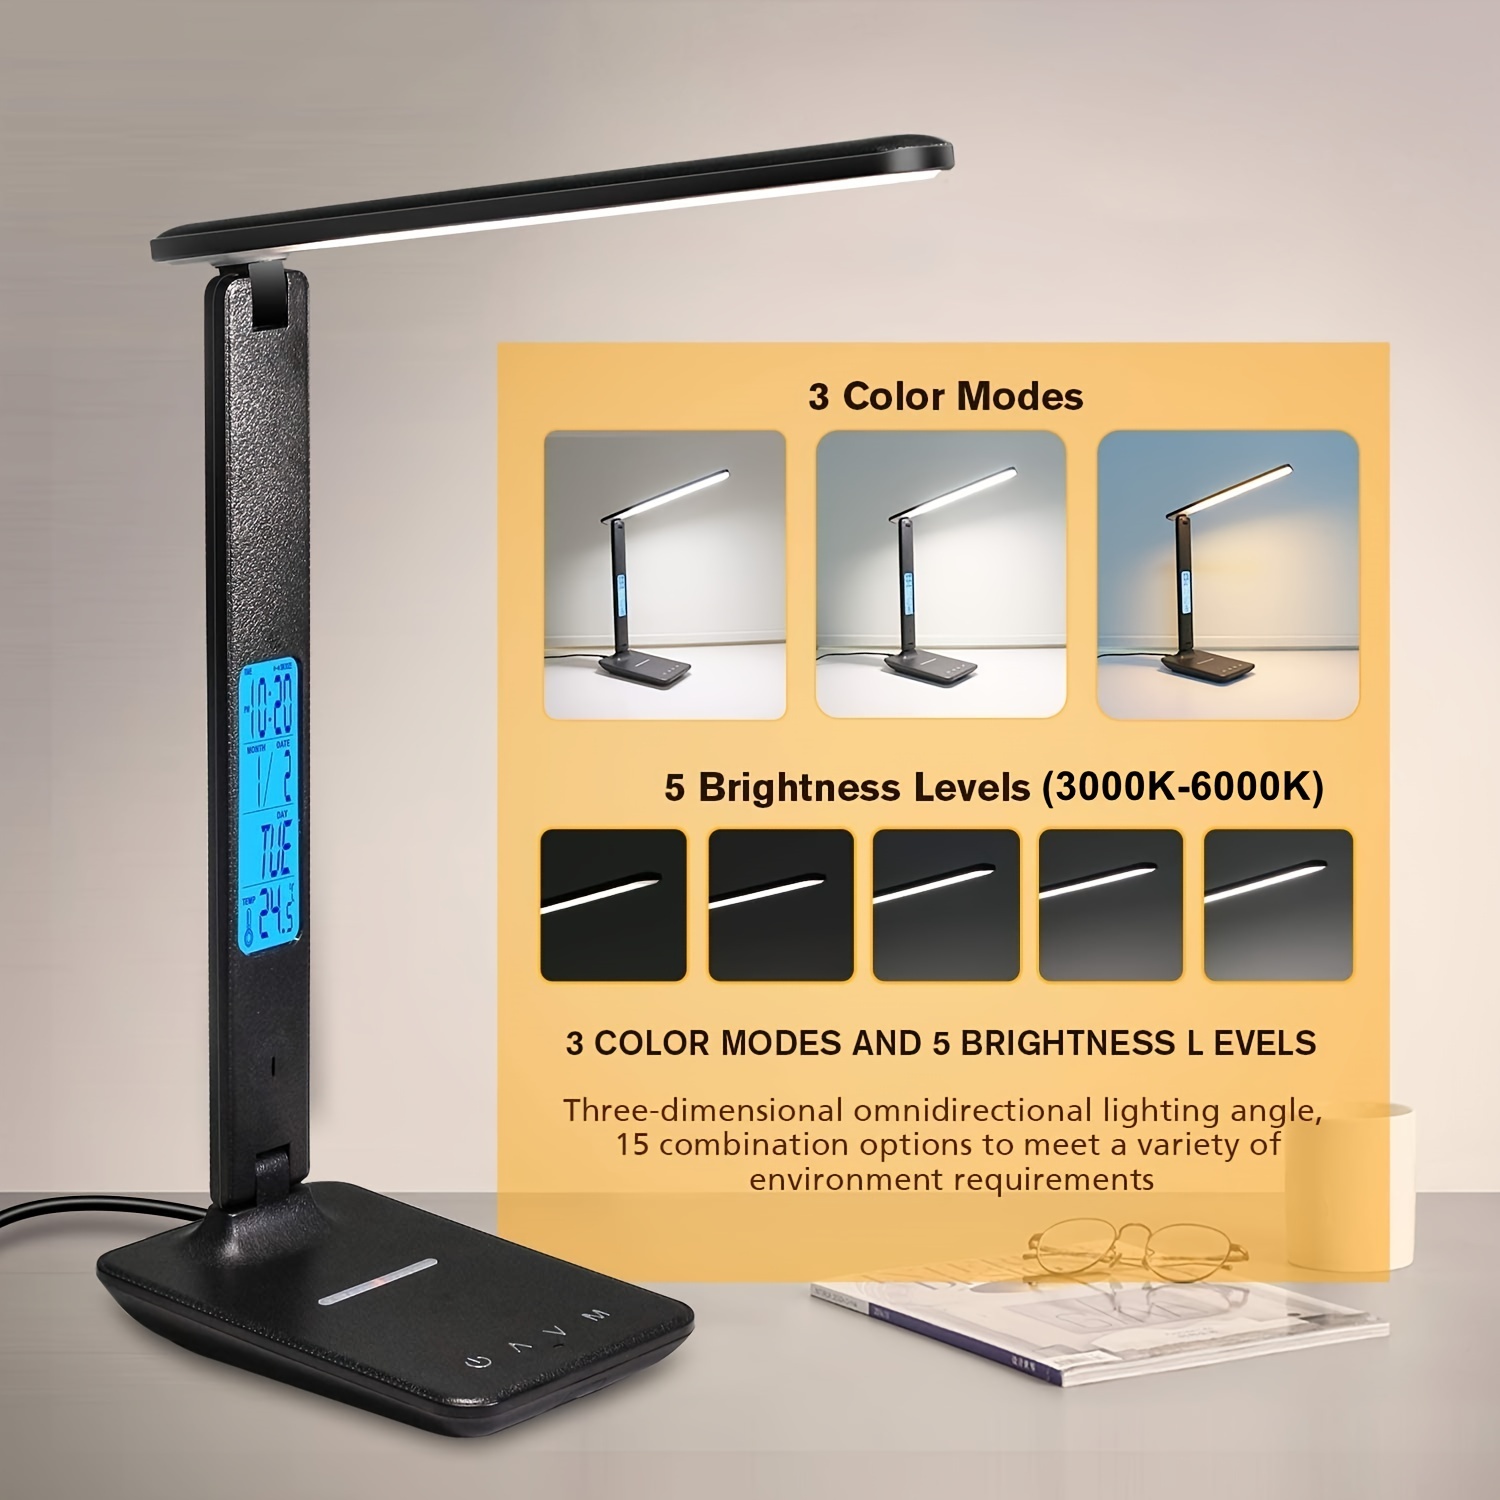 1pc OTHAI LED Desk Lamp, Office Table Lamp With Wireless Charger, Suitable For Home, Office Dimmable Desk Lamp, With USB Charging Port, Built-in Clock, Calendar, Thermometer And Reading Desk Lamp